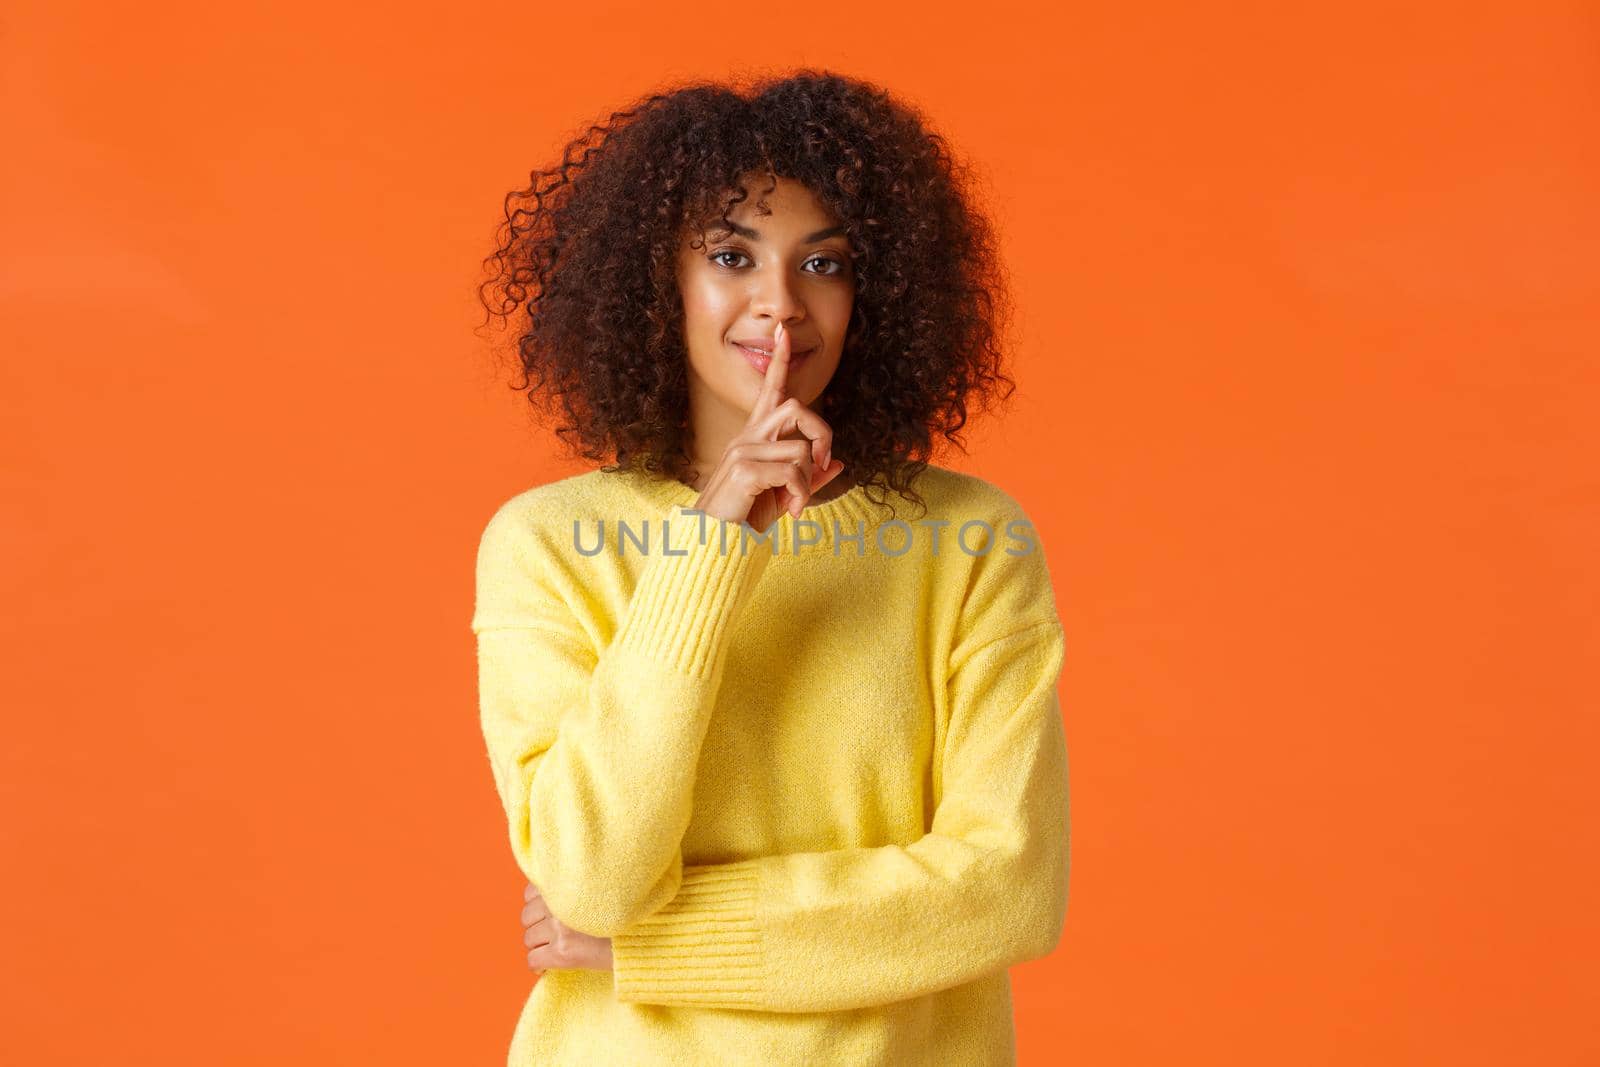 Waist-up shot sensual african-american woman have secret plan, ideas for holiday gifts, shushing, press index finger to lips silence, quiet gesture, smiling prepare surprise, orange background.